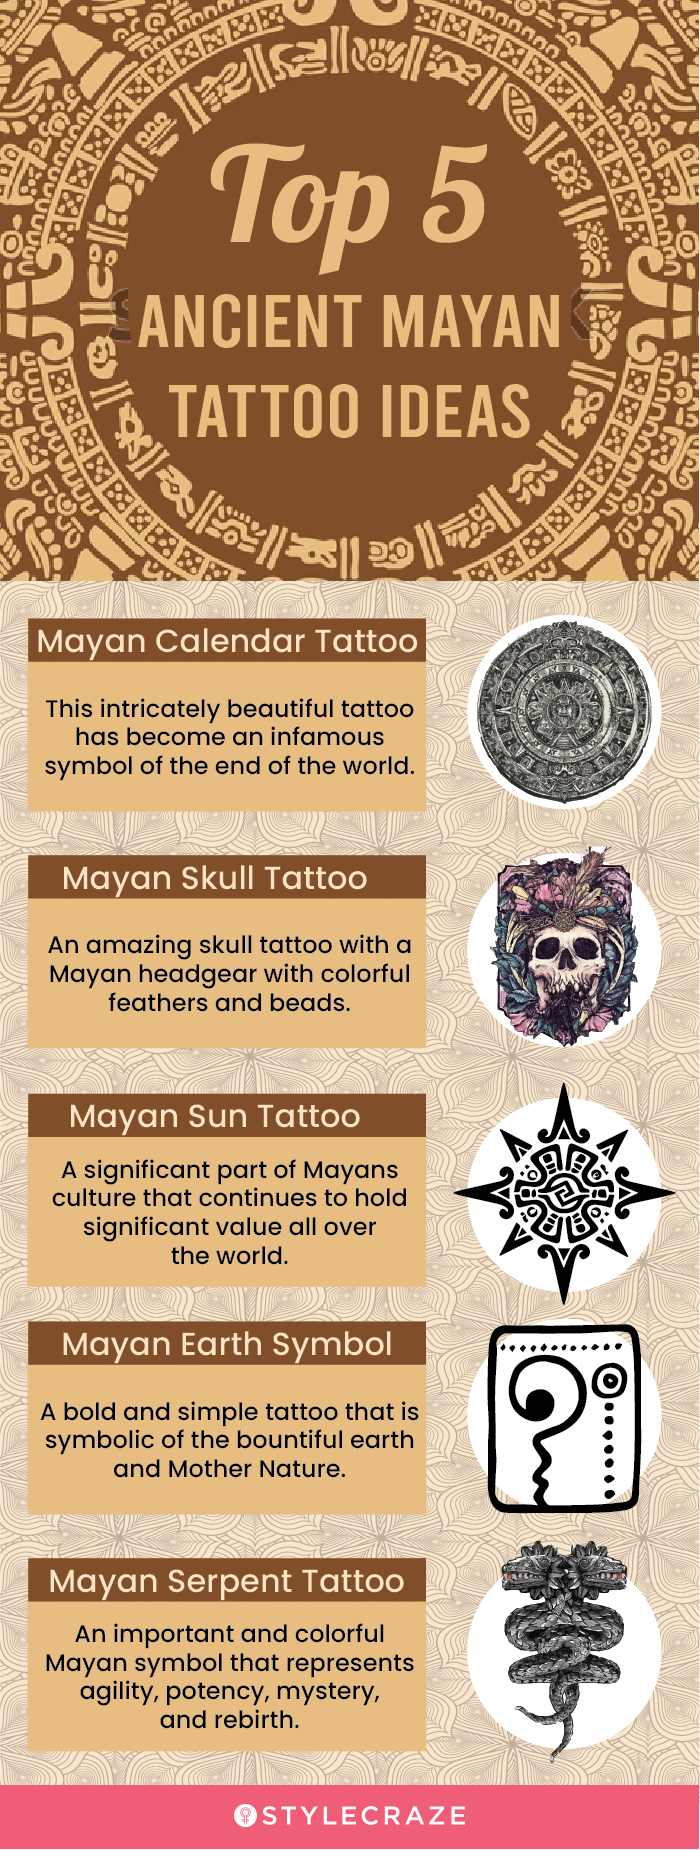 top 5 ancient mayan tattoo ideas (infographic)